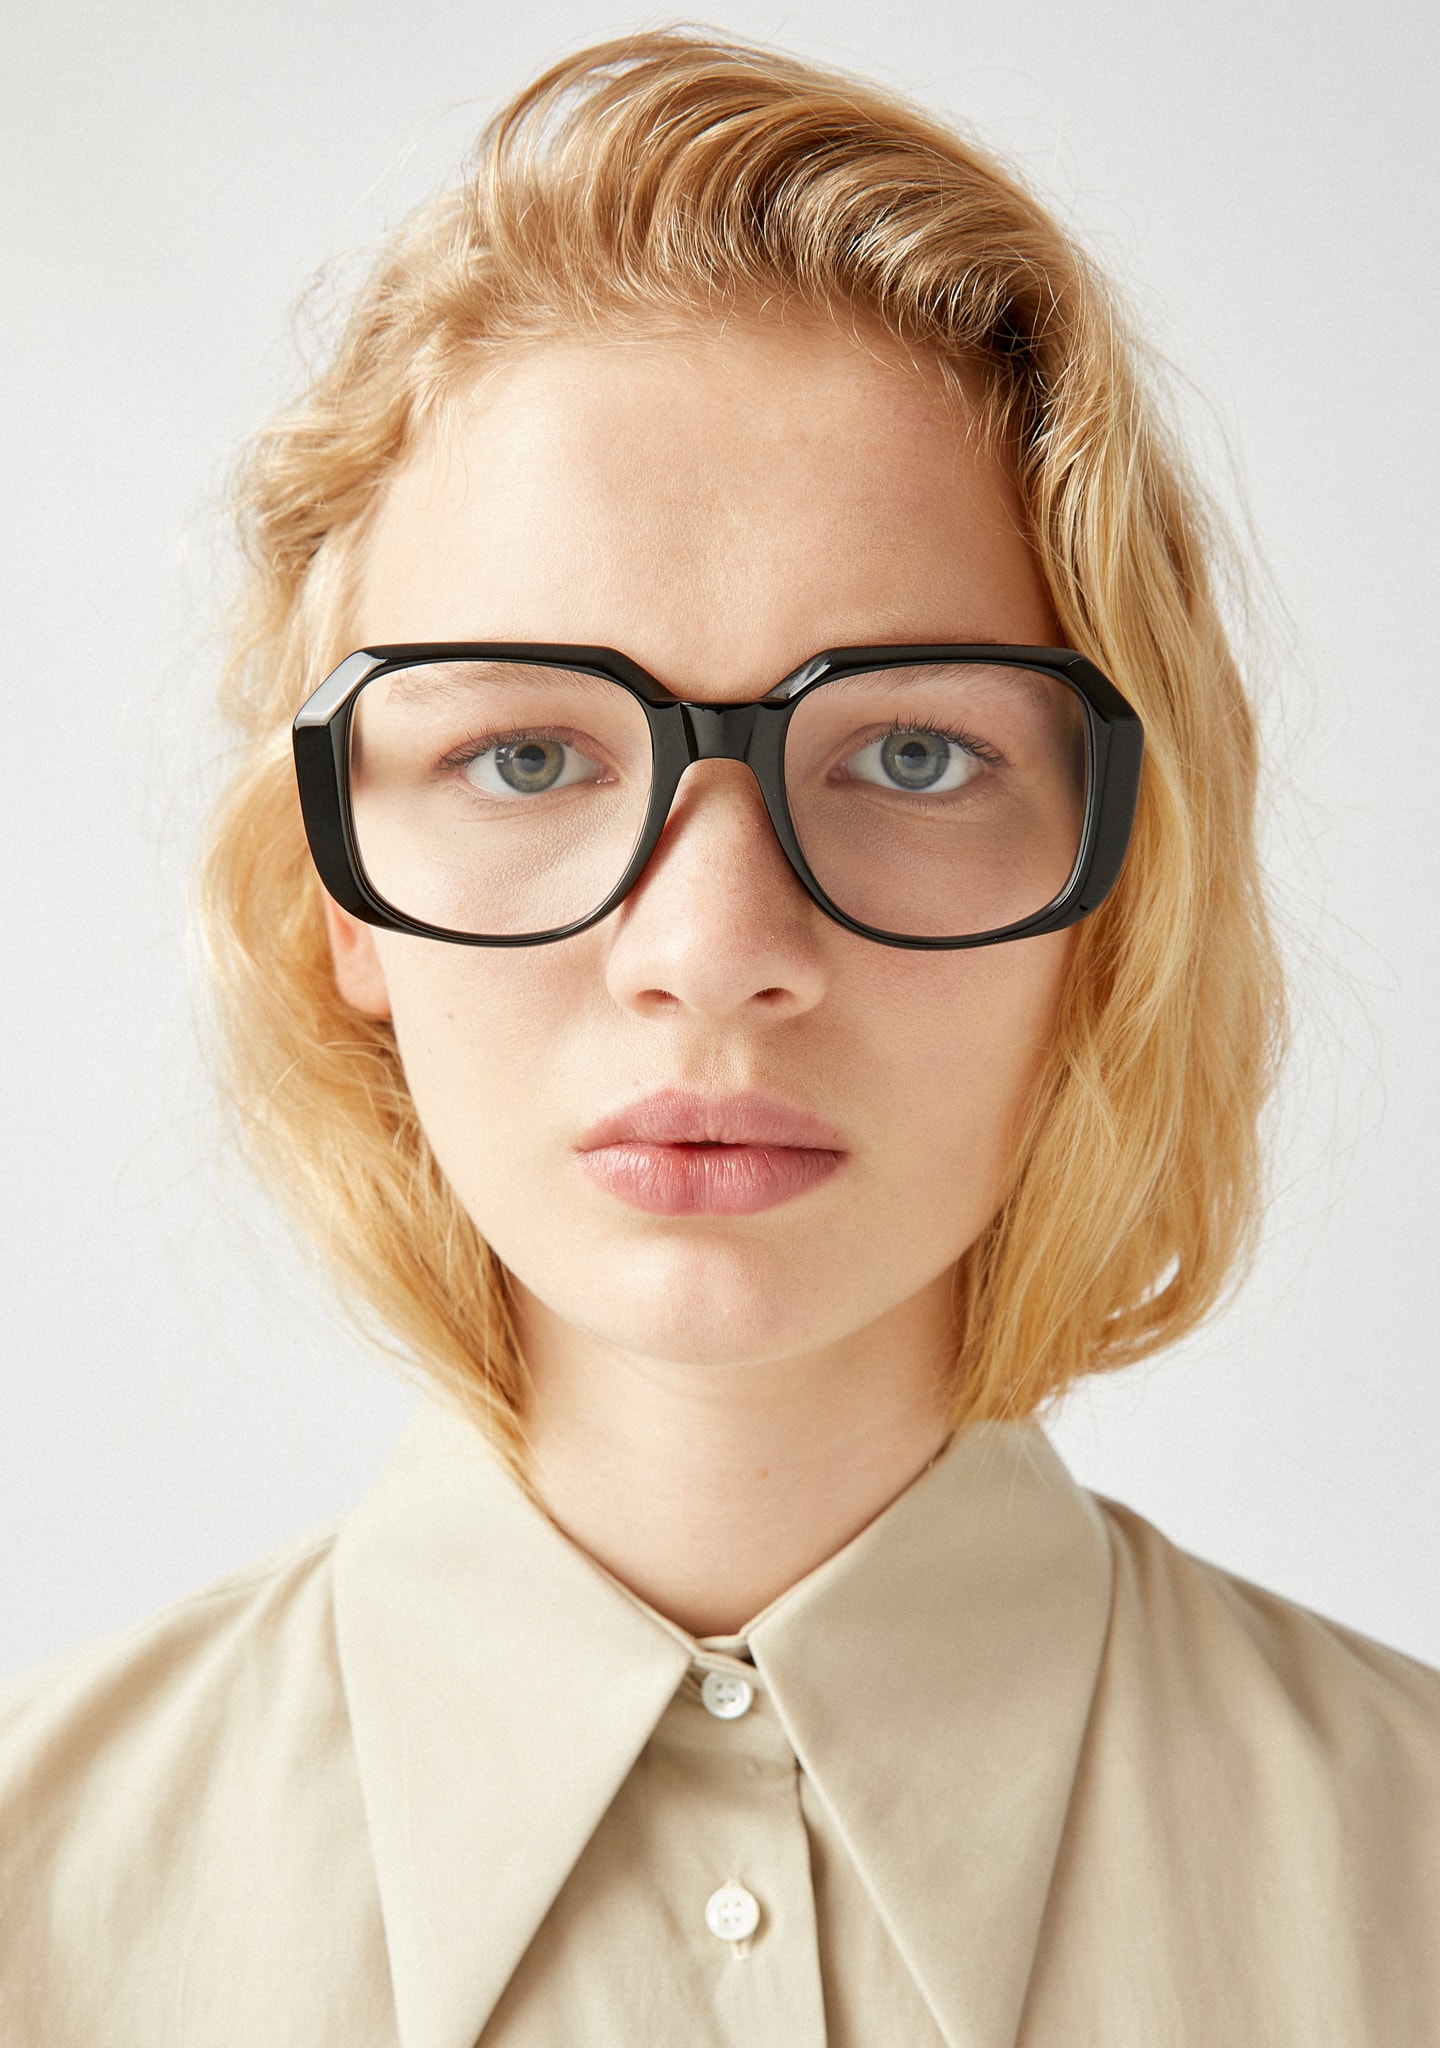 andrea phaneuf add hairy women with glasses photo